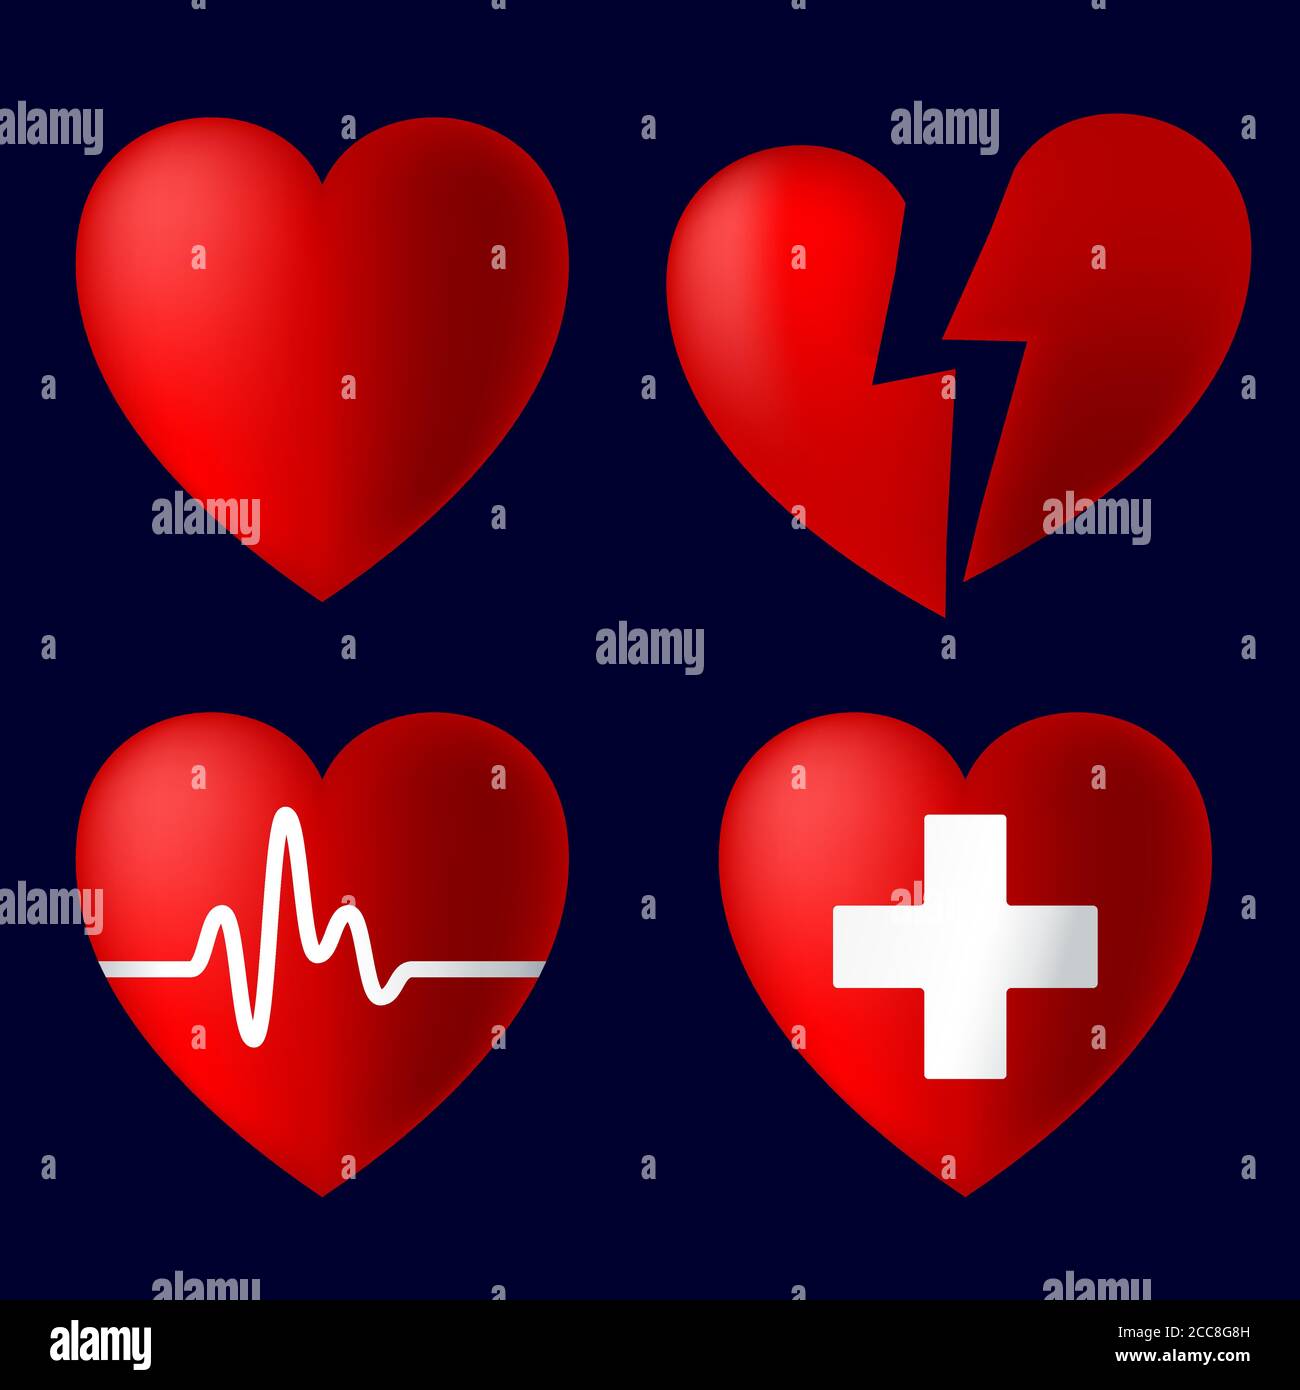 Vector illustration. Four heart icons with lights and shadows. Love and health symbols Stock Vector